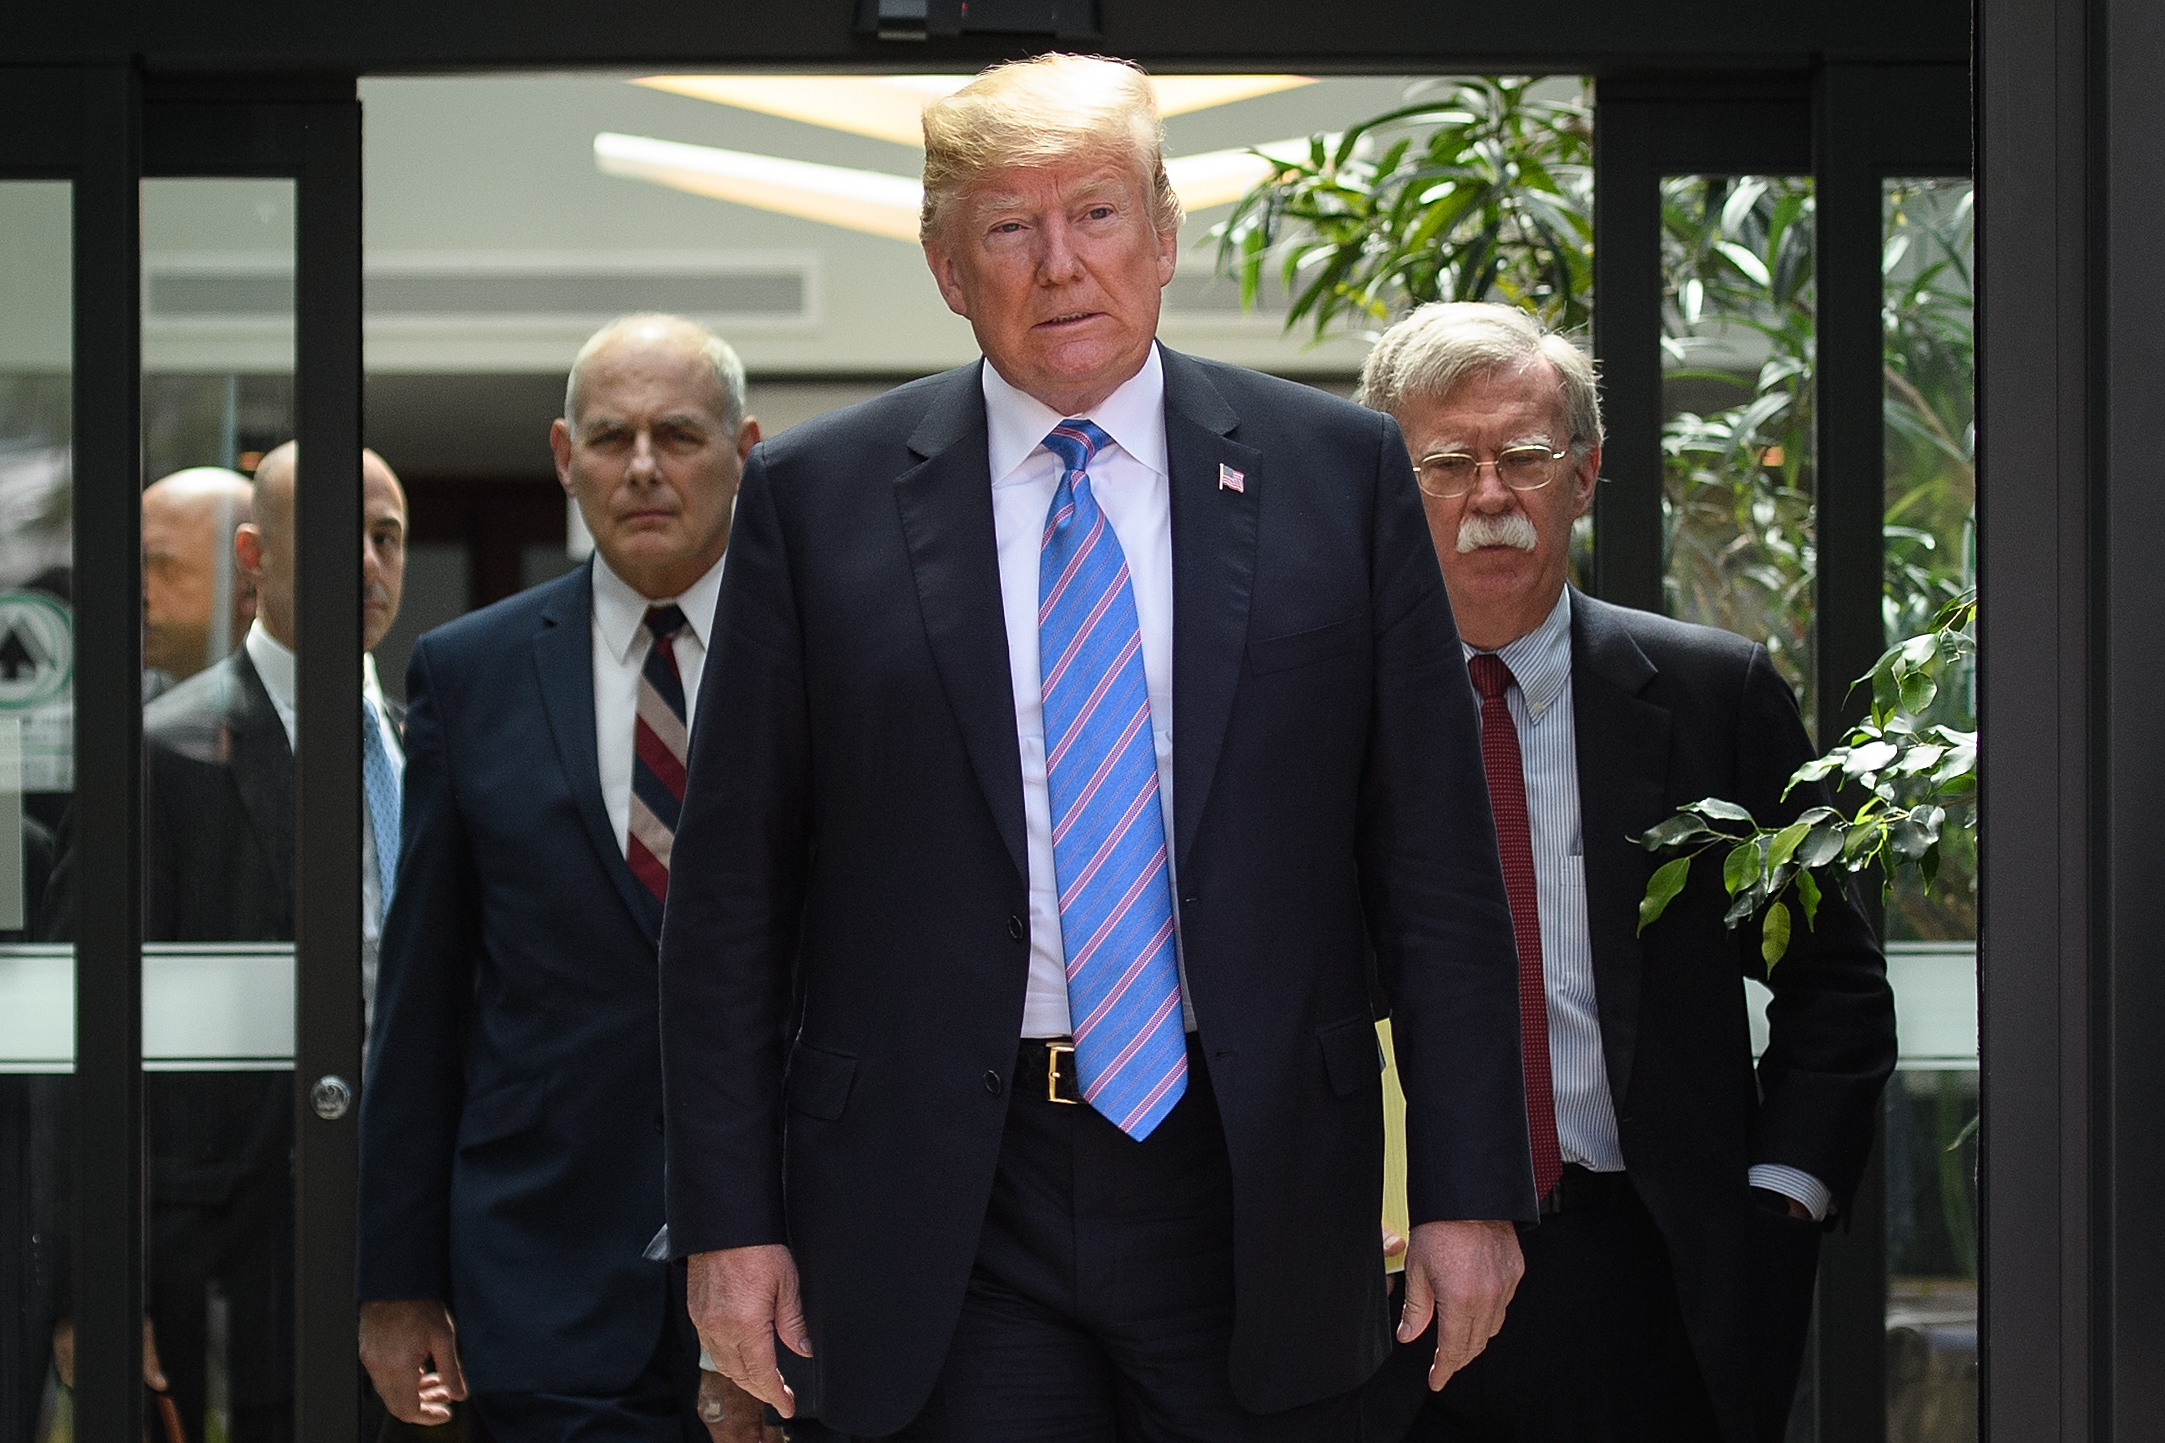 PHOTO: Donald Trump leaves with Chief of Staff John Kelly and National Security Advisor John Bolton after holding a press conference, June 9, 2018 ,in La Malbaie, Canada.